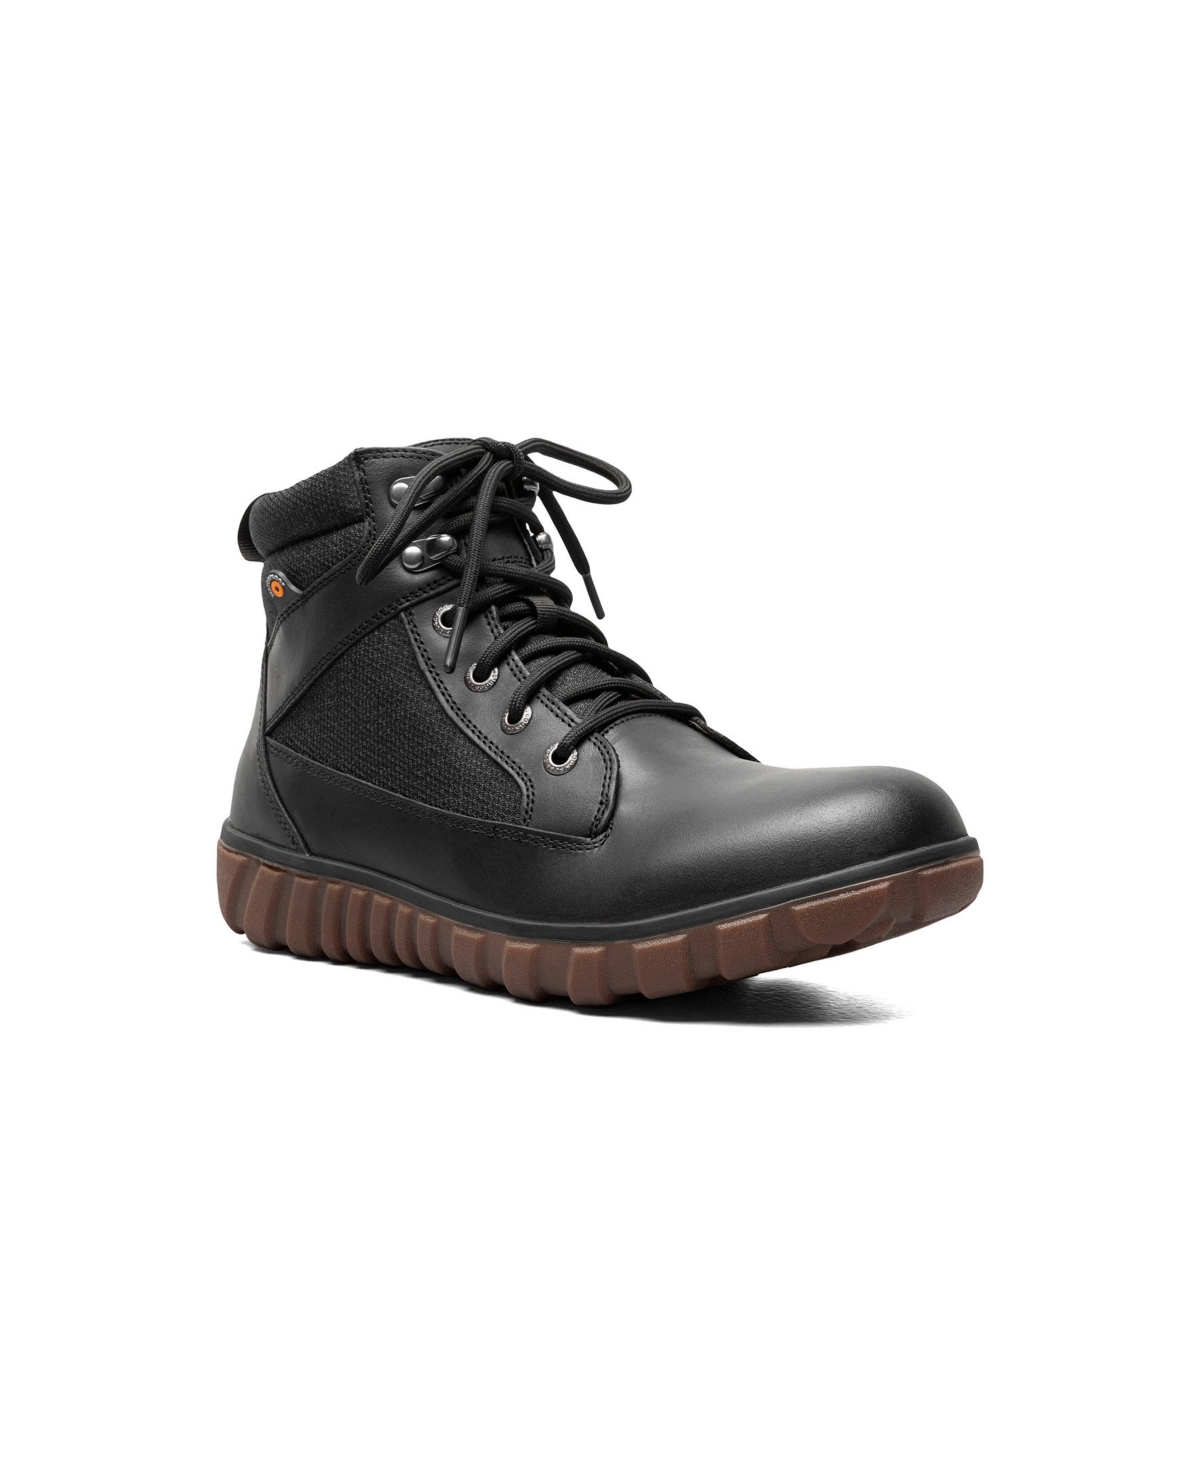 Men's Classic Casual Lace Up Boot - Black Multi